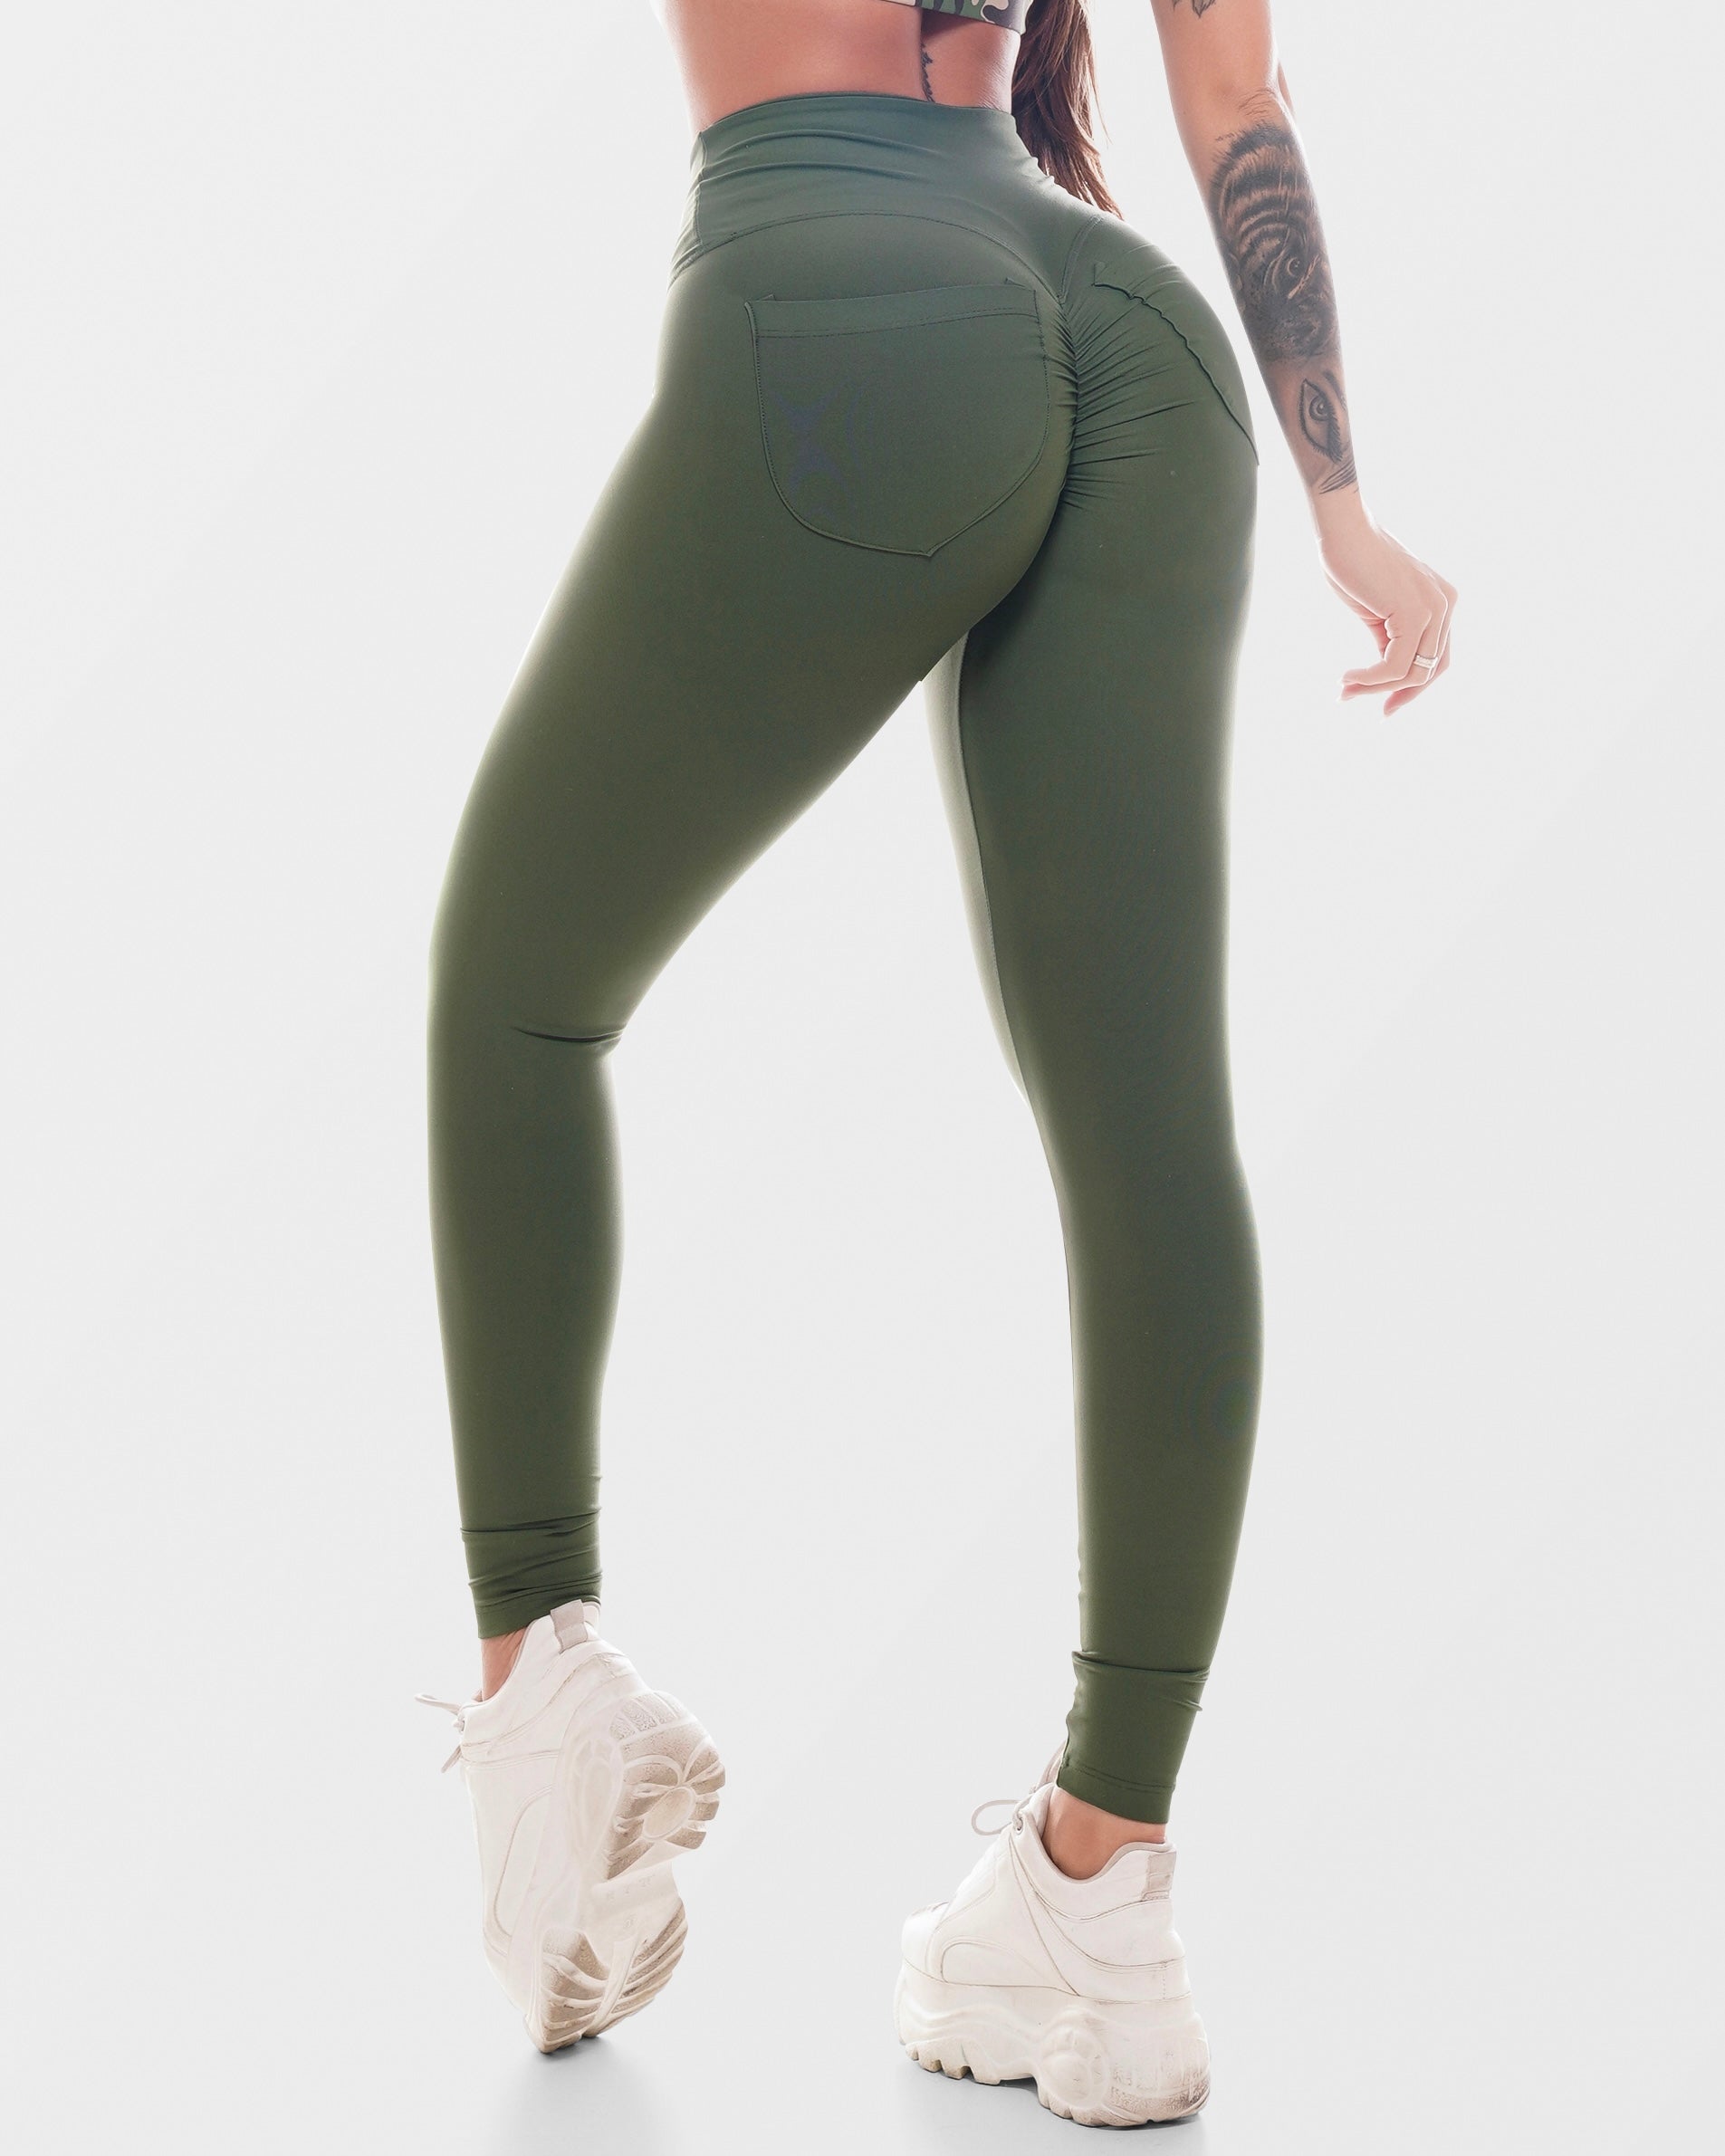 Army Scrunch bum Tights.Register online for 10% Off